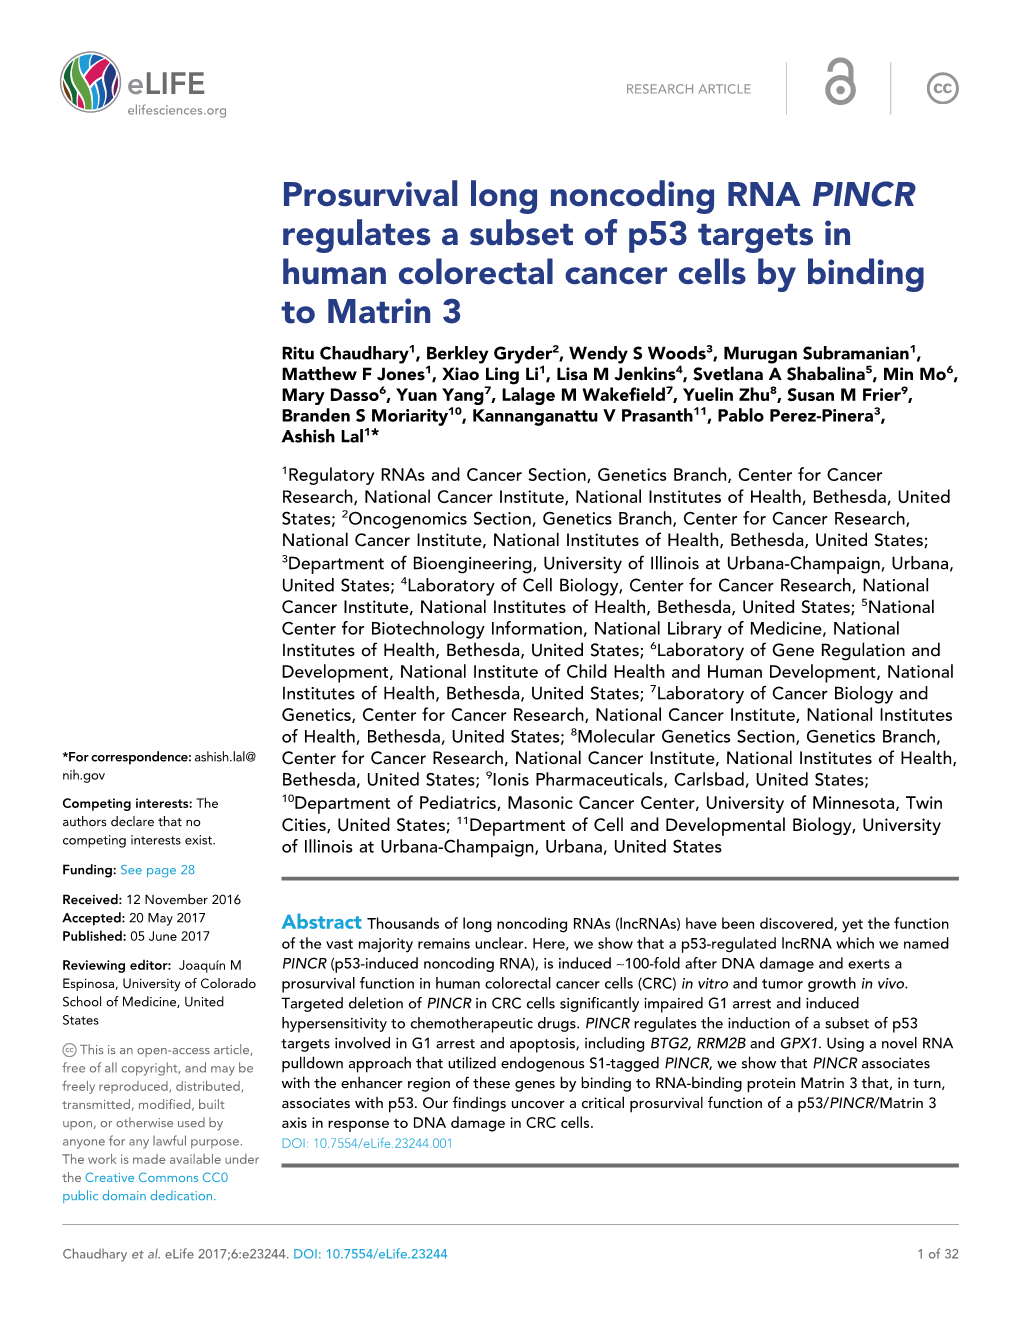 Prosurvival Long Noncoding RNA PINCR Regulates a Subset of P53